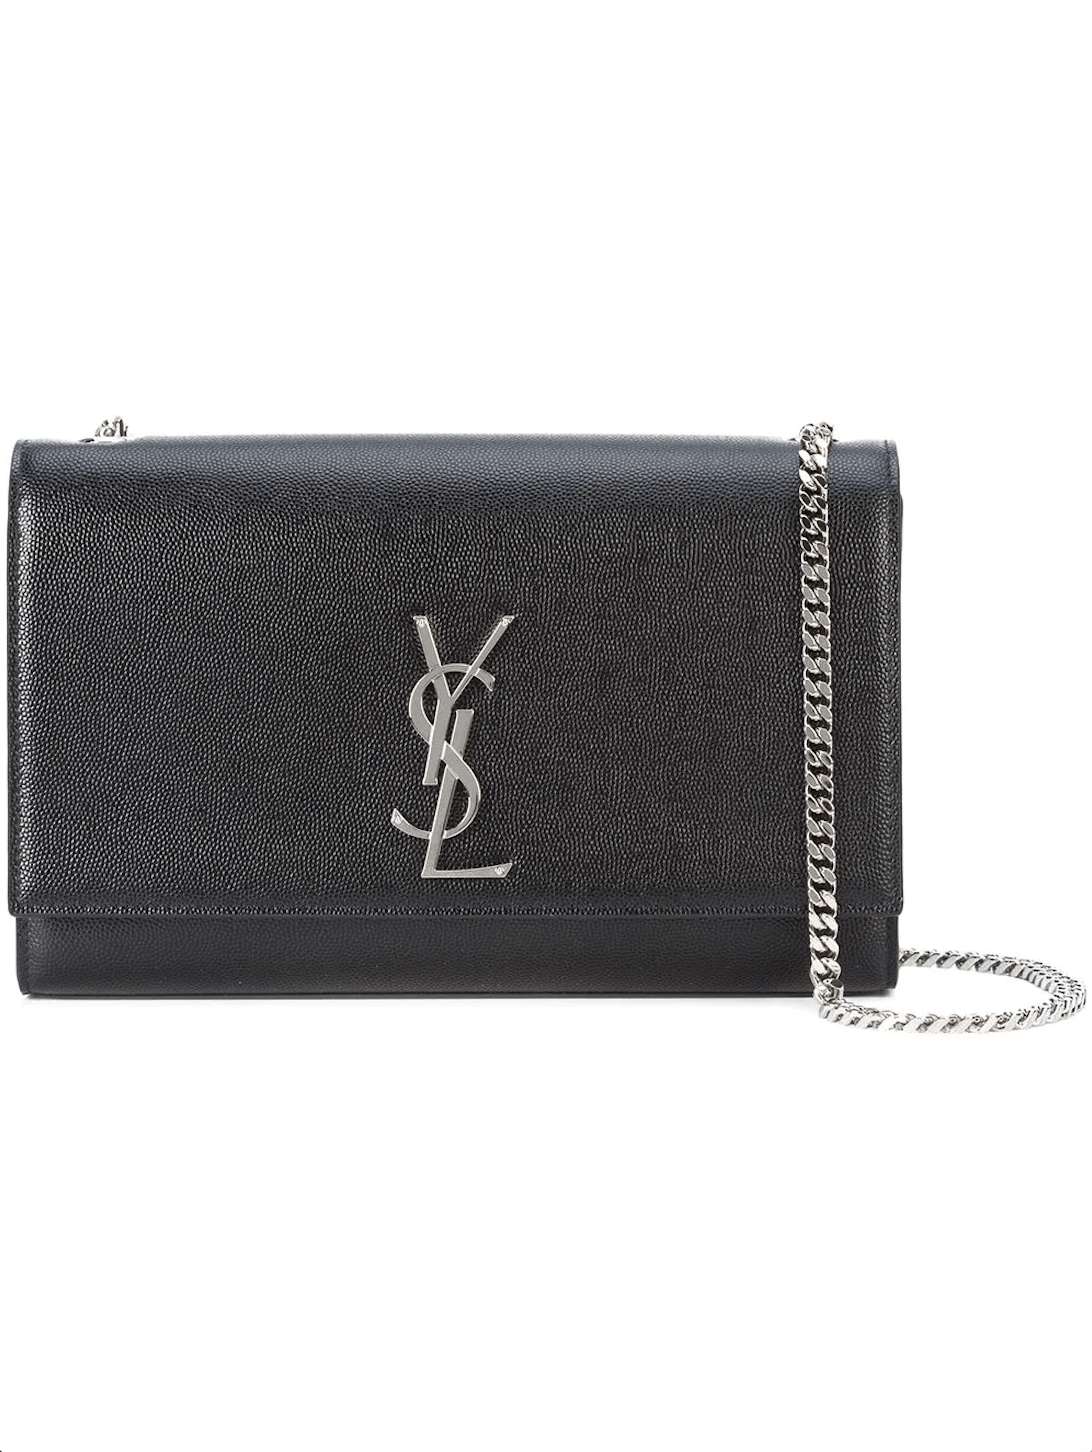 Saint Laurent Lou Puffer Small YSL Shoulder Bag in Quilted Leather -  Bergdorf Goodman